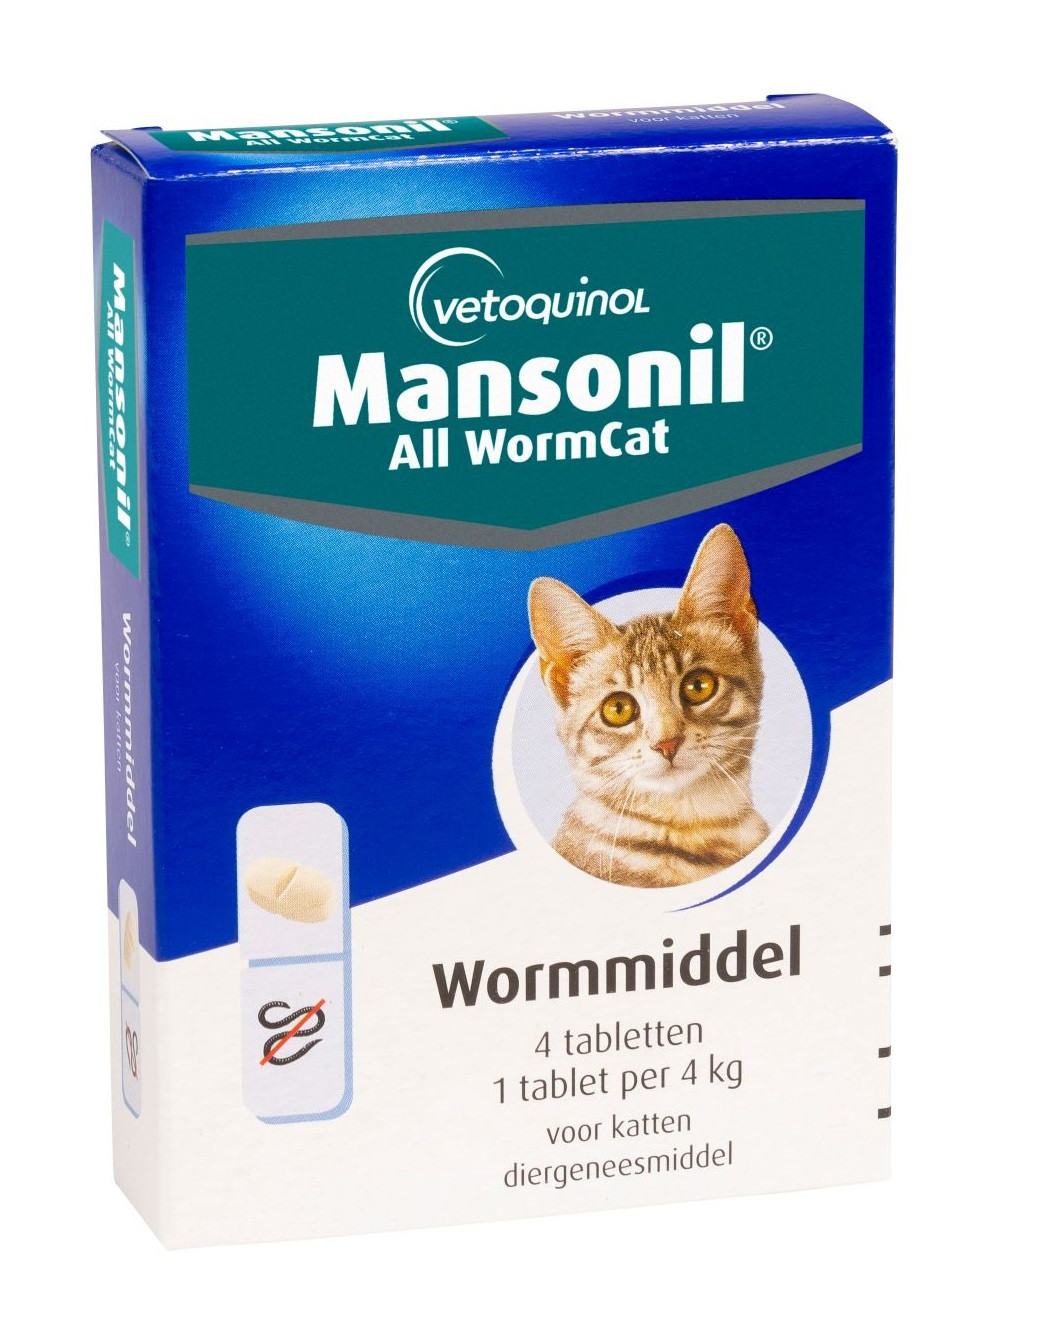 Mansonil All Worm Cat pour chat